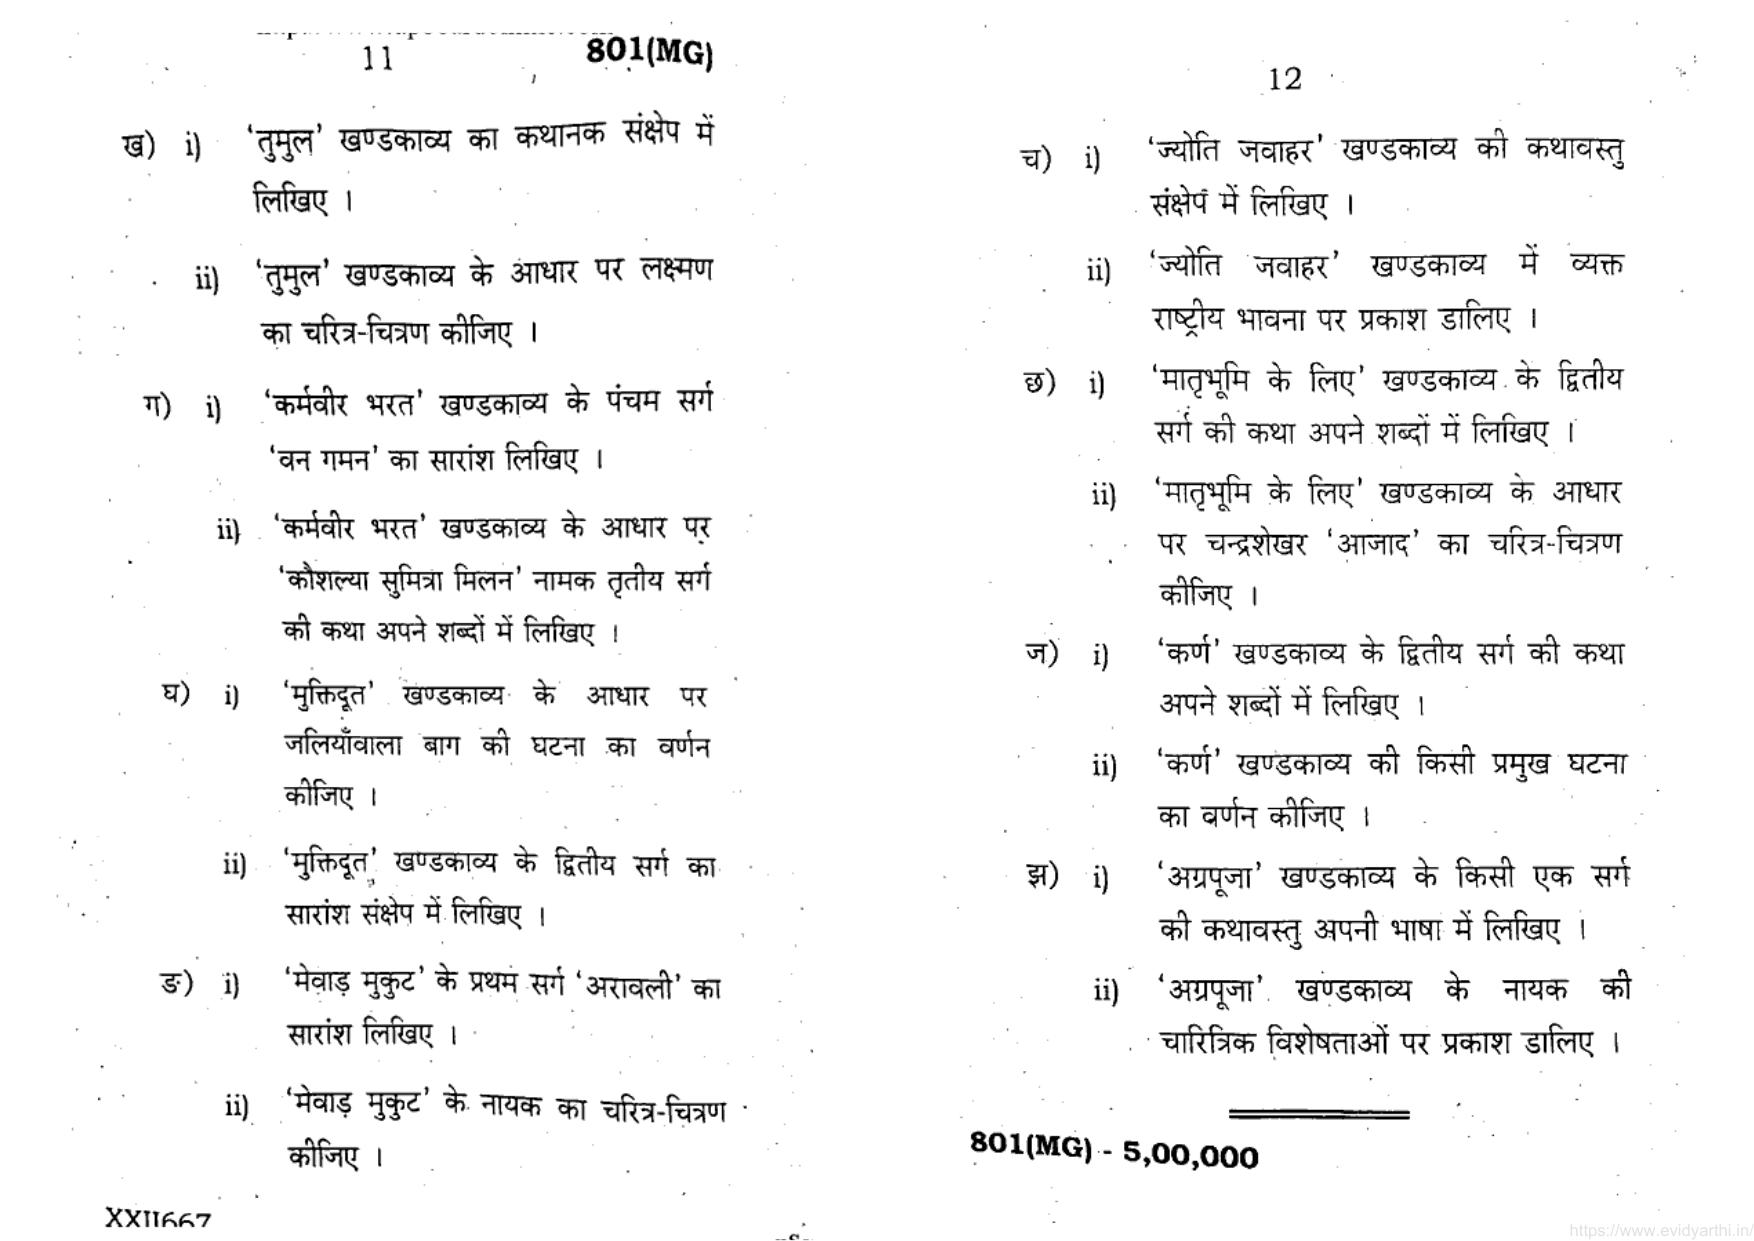 UP Board Previous Year Question Paper Class 10 Hindi (801 MG) – 2020 - Page 6